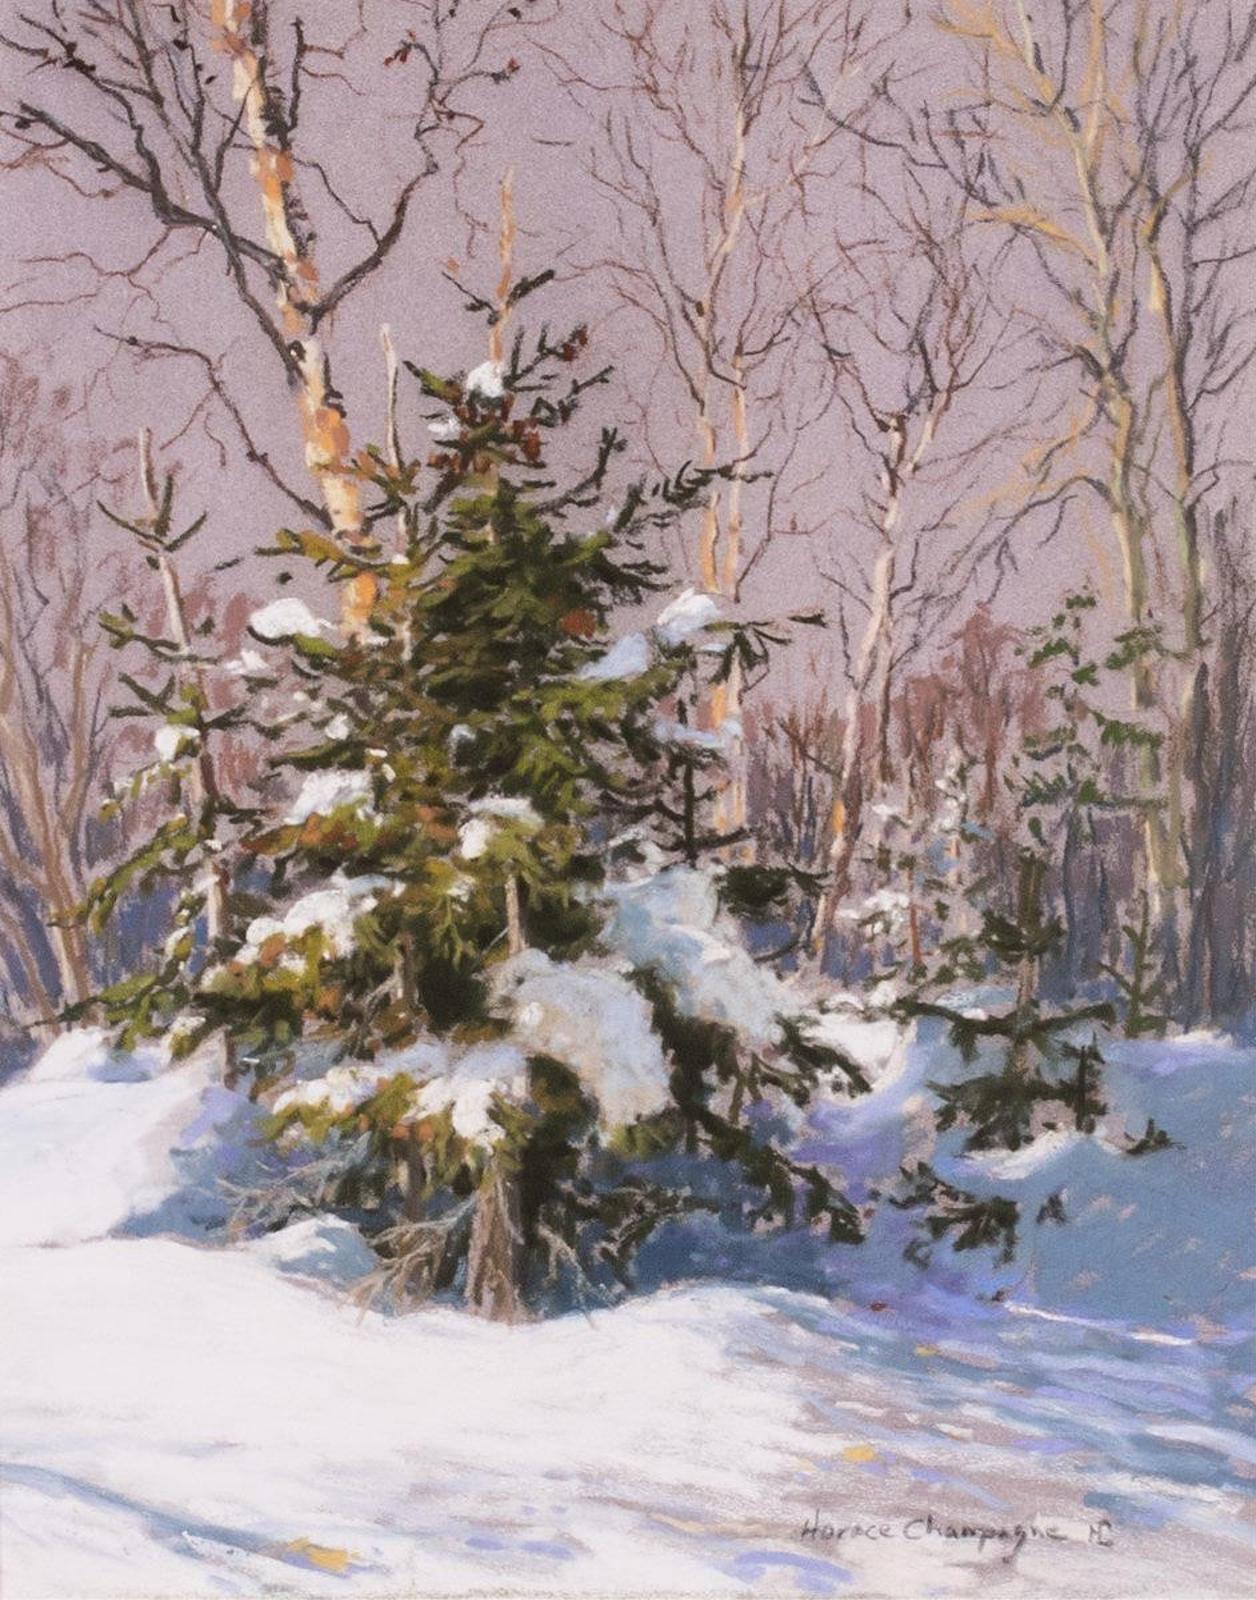 Horace Champagne (1937) - Deep Snow In The Forest (Near St. Hilarion, Quebec); 1997